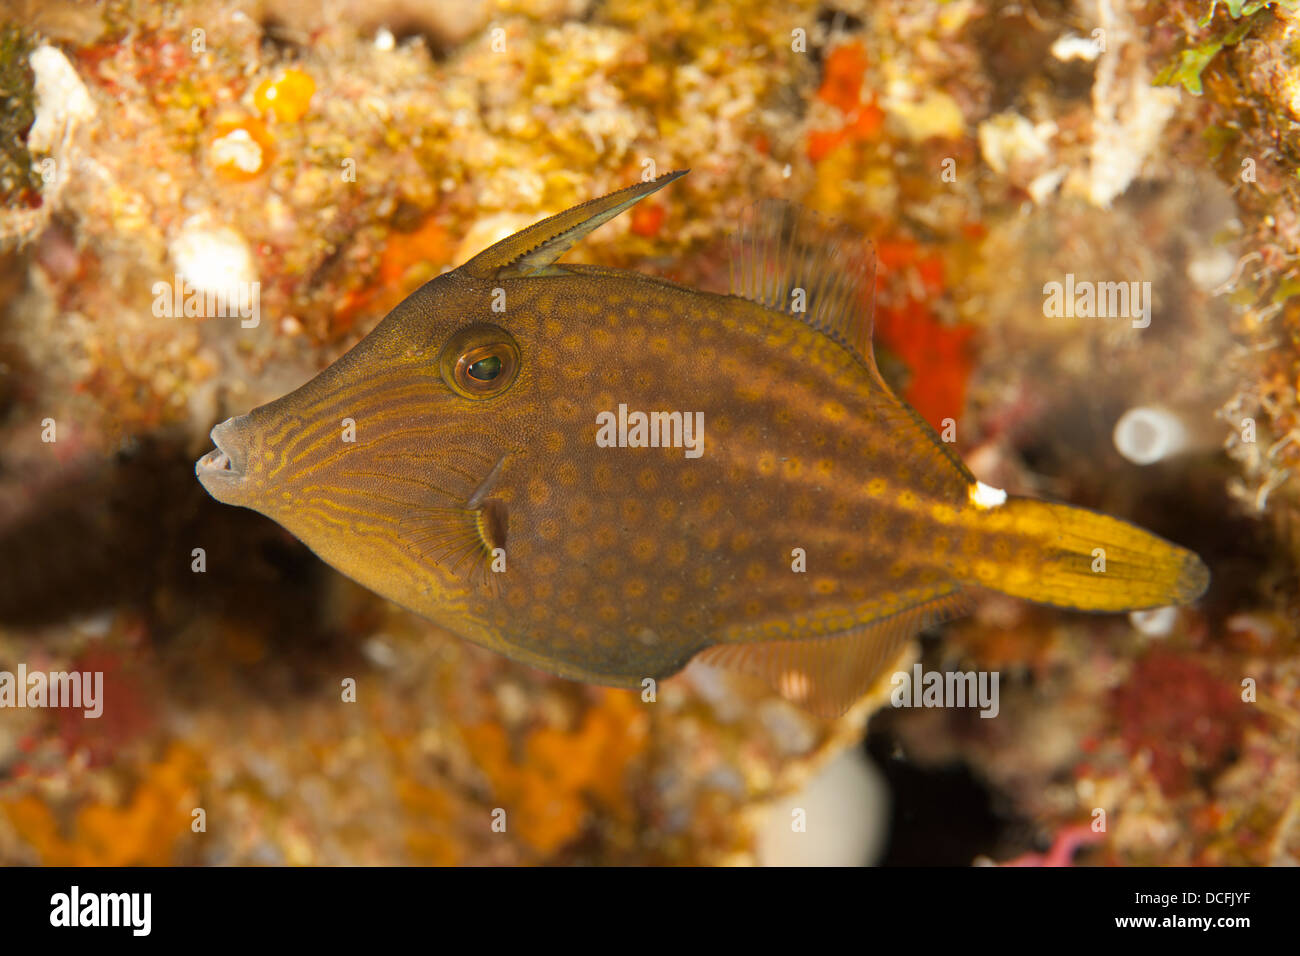 Orangespotted Filefish (Cantherhines pullus) on a tropical coral reef off the island of Roatan, Honduras. Stock Photo